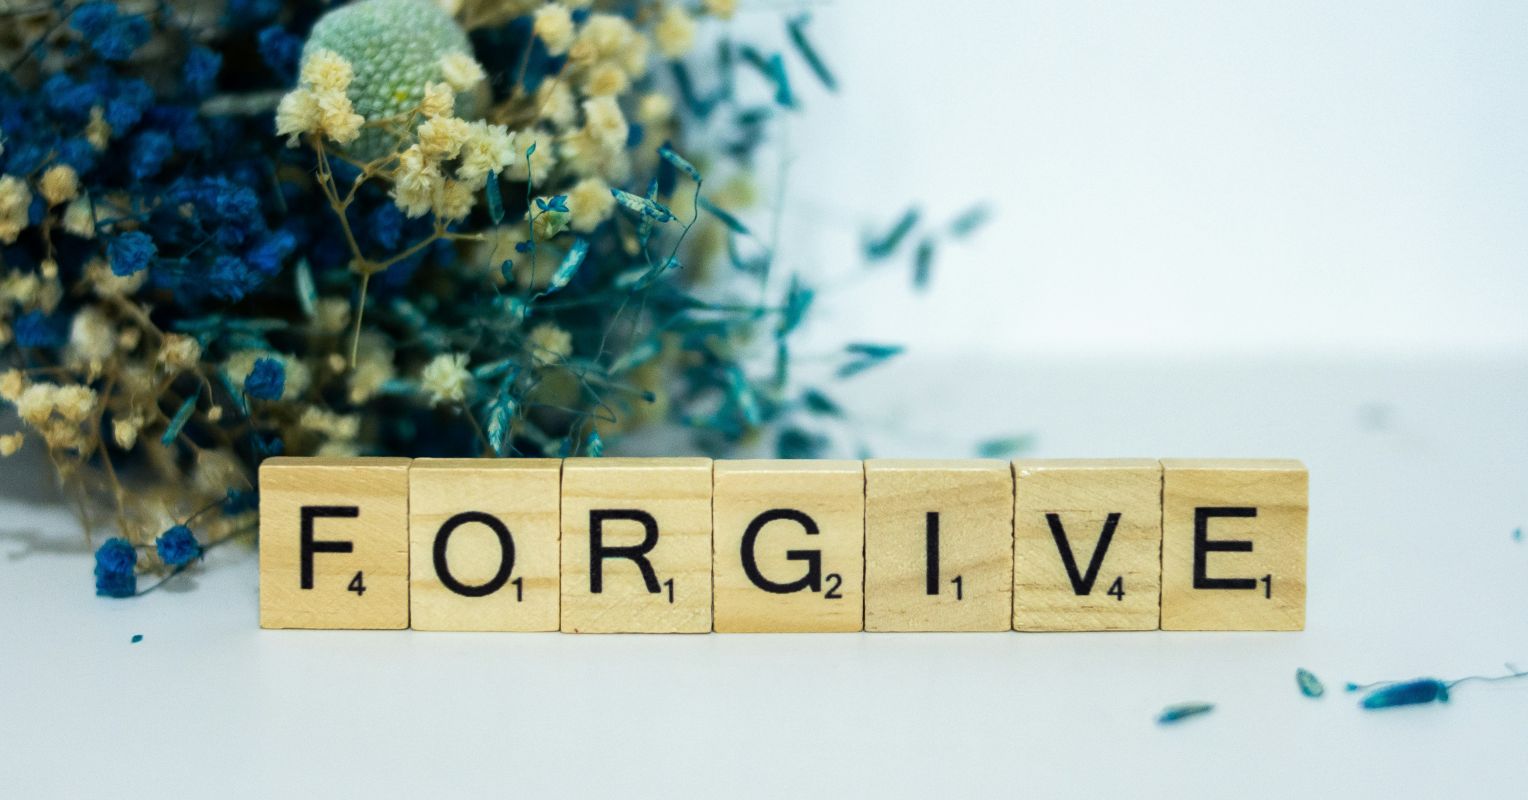 How Can You Find Forgiveness?